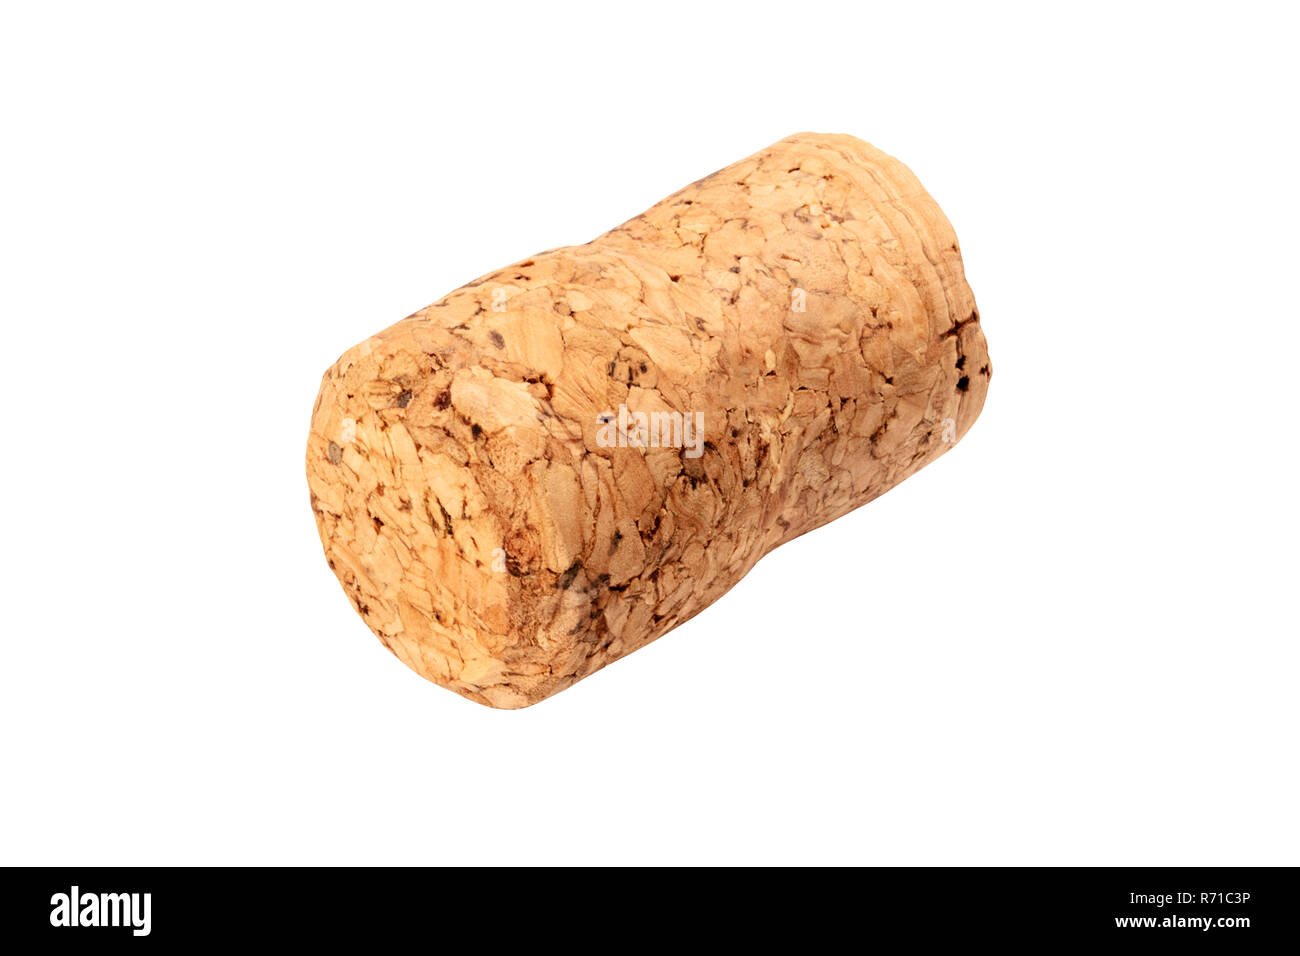 A closeup photo of a champagne cork, isolated on a white background with a clipping path Stock Photo